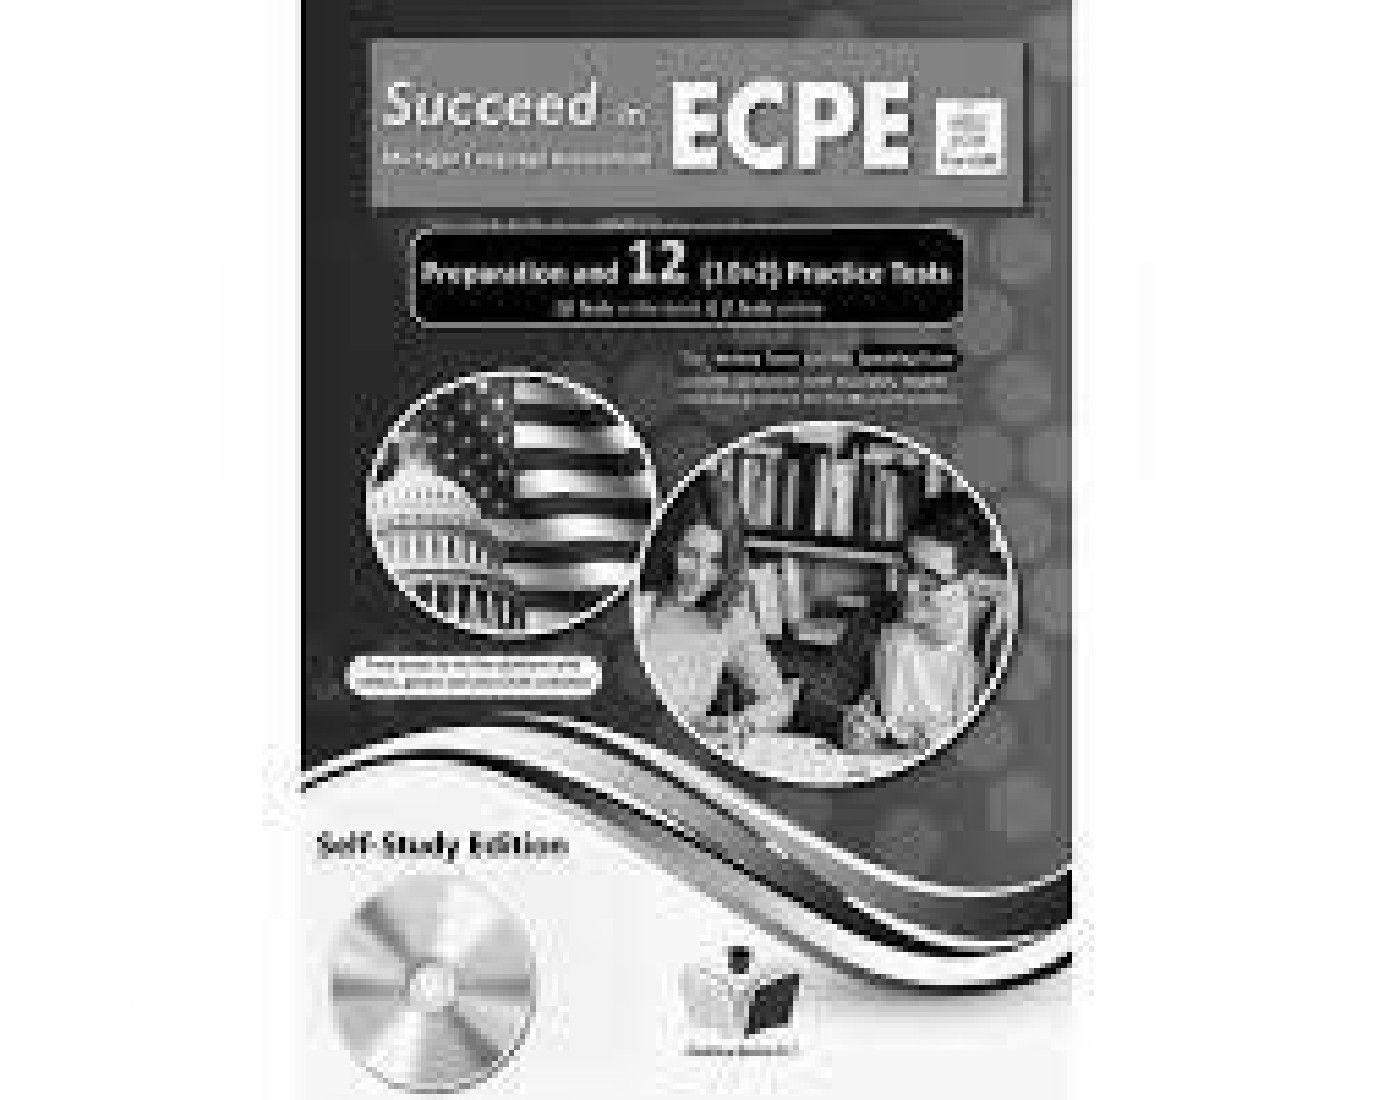 SUCCEED IN MICHIGAN ECPE 12 PRACTICE TESTS 2021 FORMAT SELF STUDY PACK